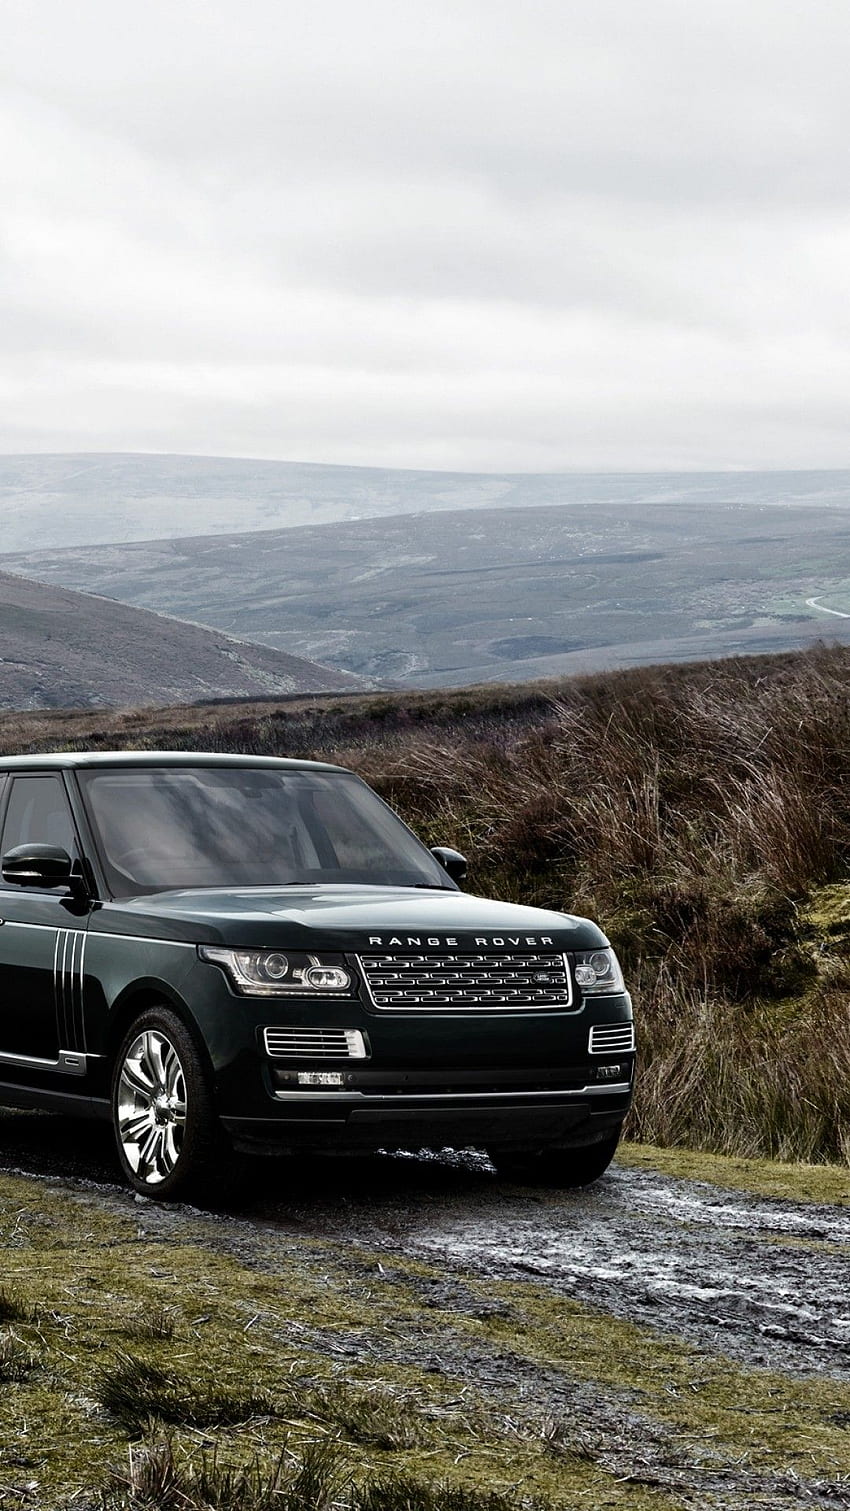 Land Rover Range Rover, Black, Suv, Luxury, Cars, Hills for iPhone 8, iPhone 7 Plus, iPhone 6+, Sony Xperia Z, HTC One - Maiden HD phone wallpaper